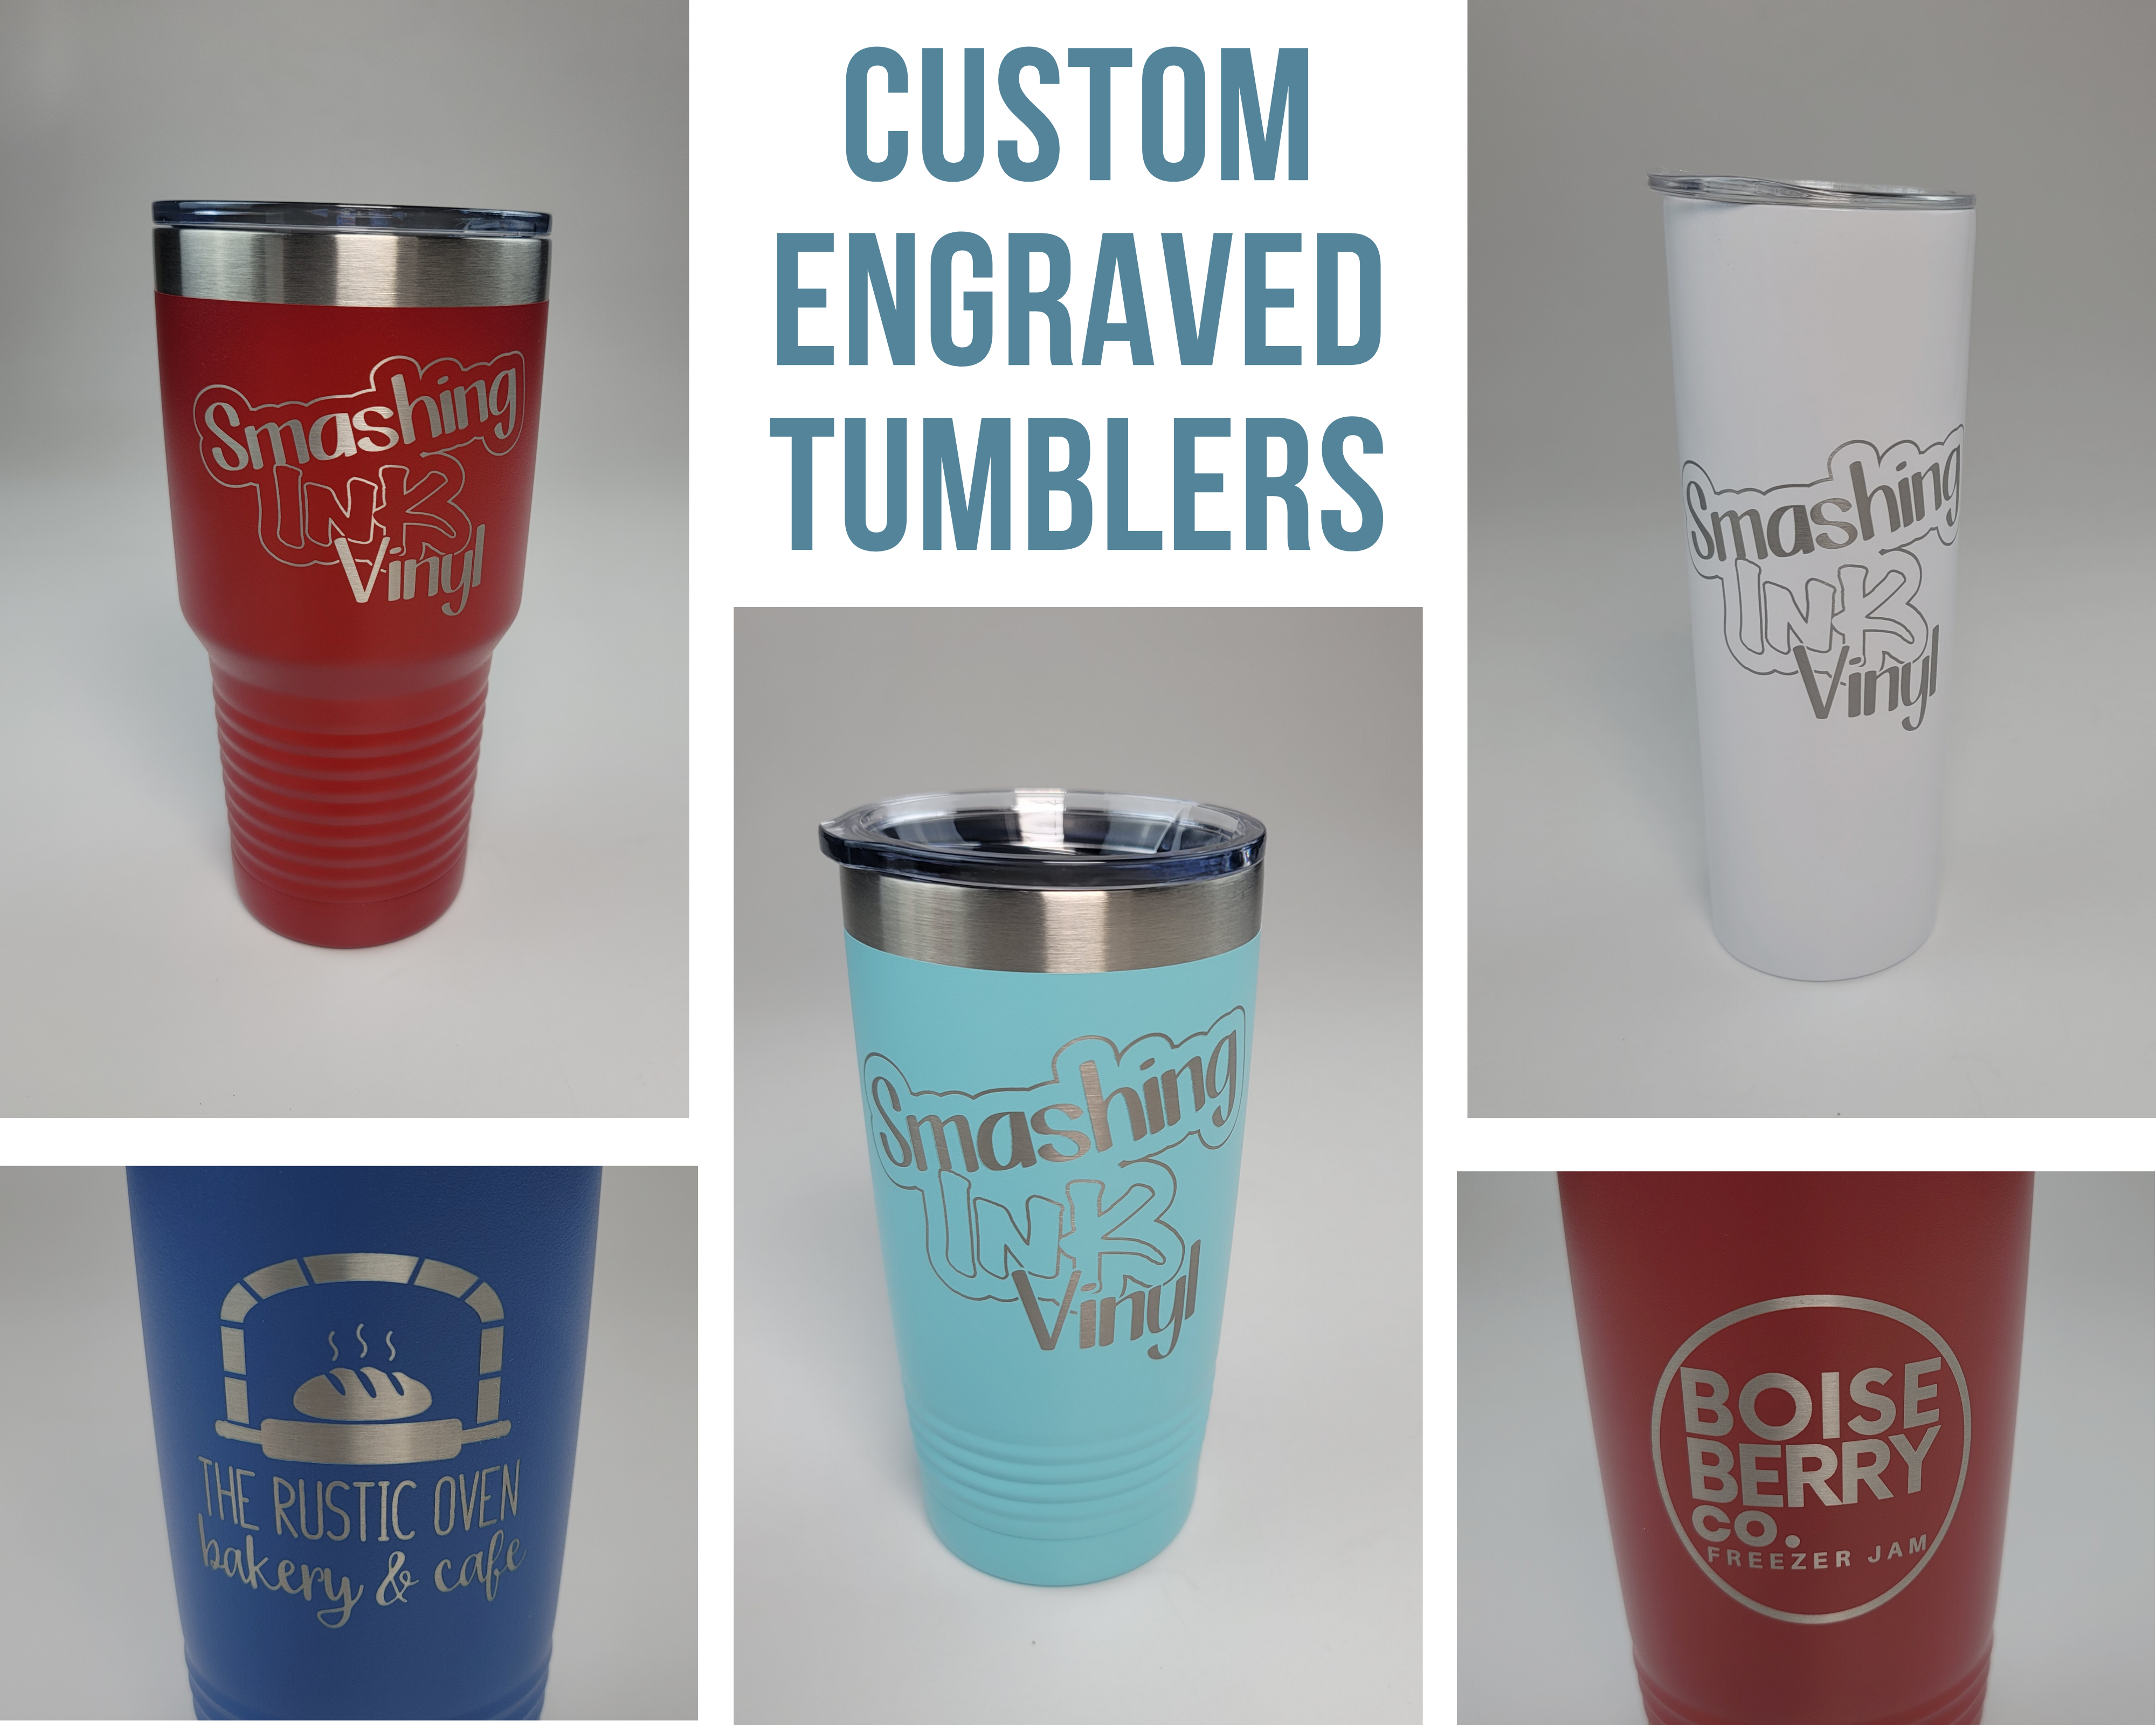 https://cdn.shopify.com/s/files/1/0077/8675/8241/products/CustomEngravedTumblers_1.png?v=1638662696